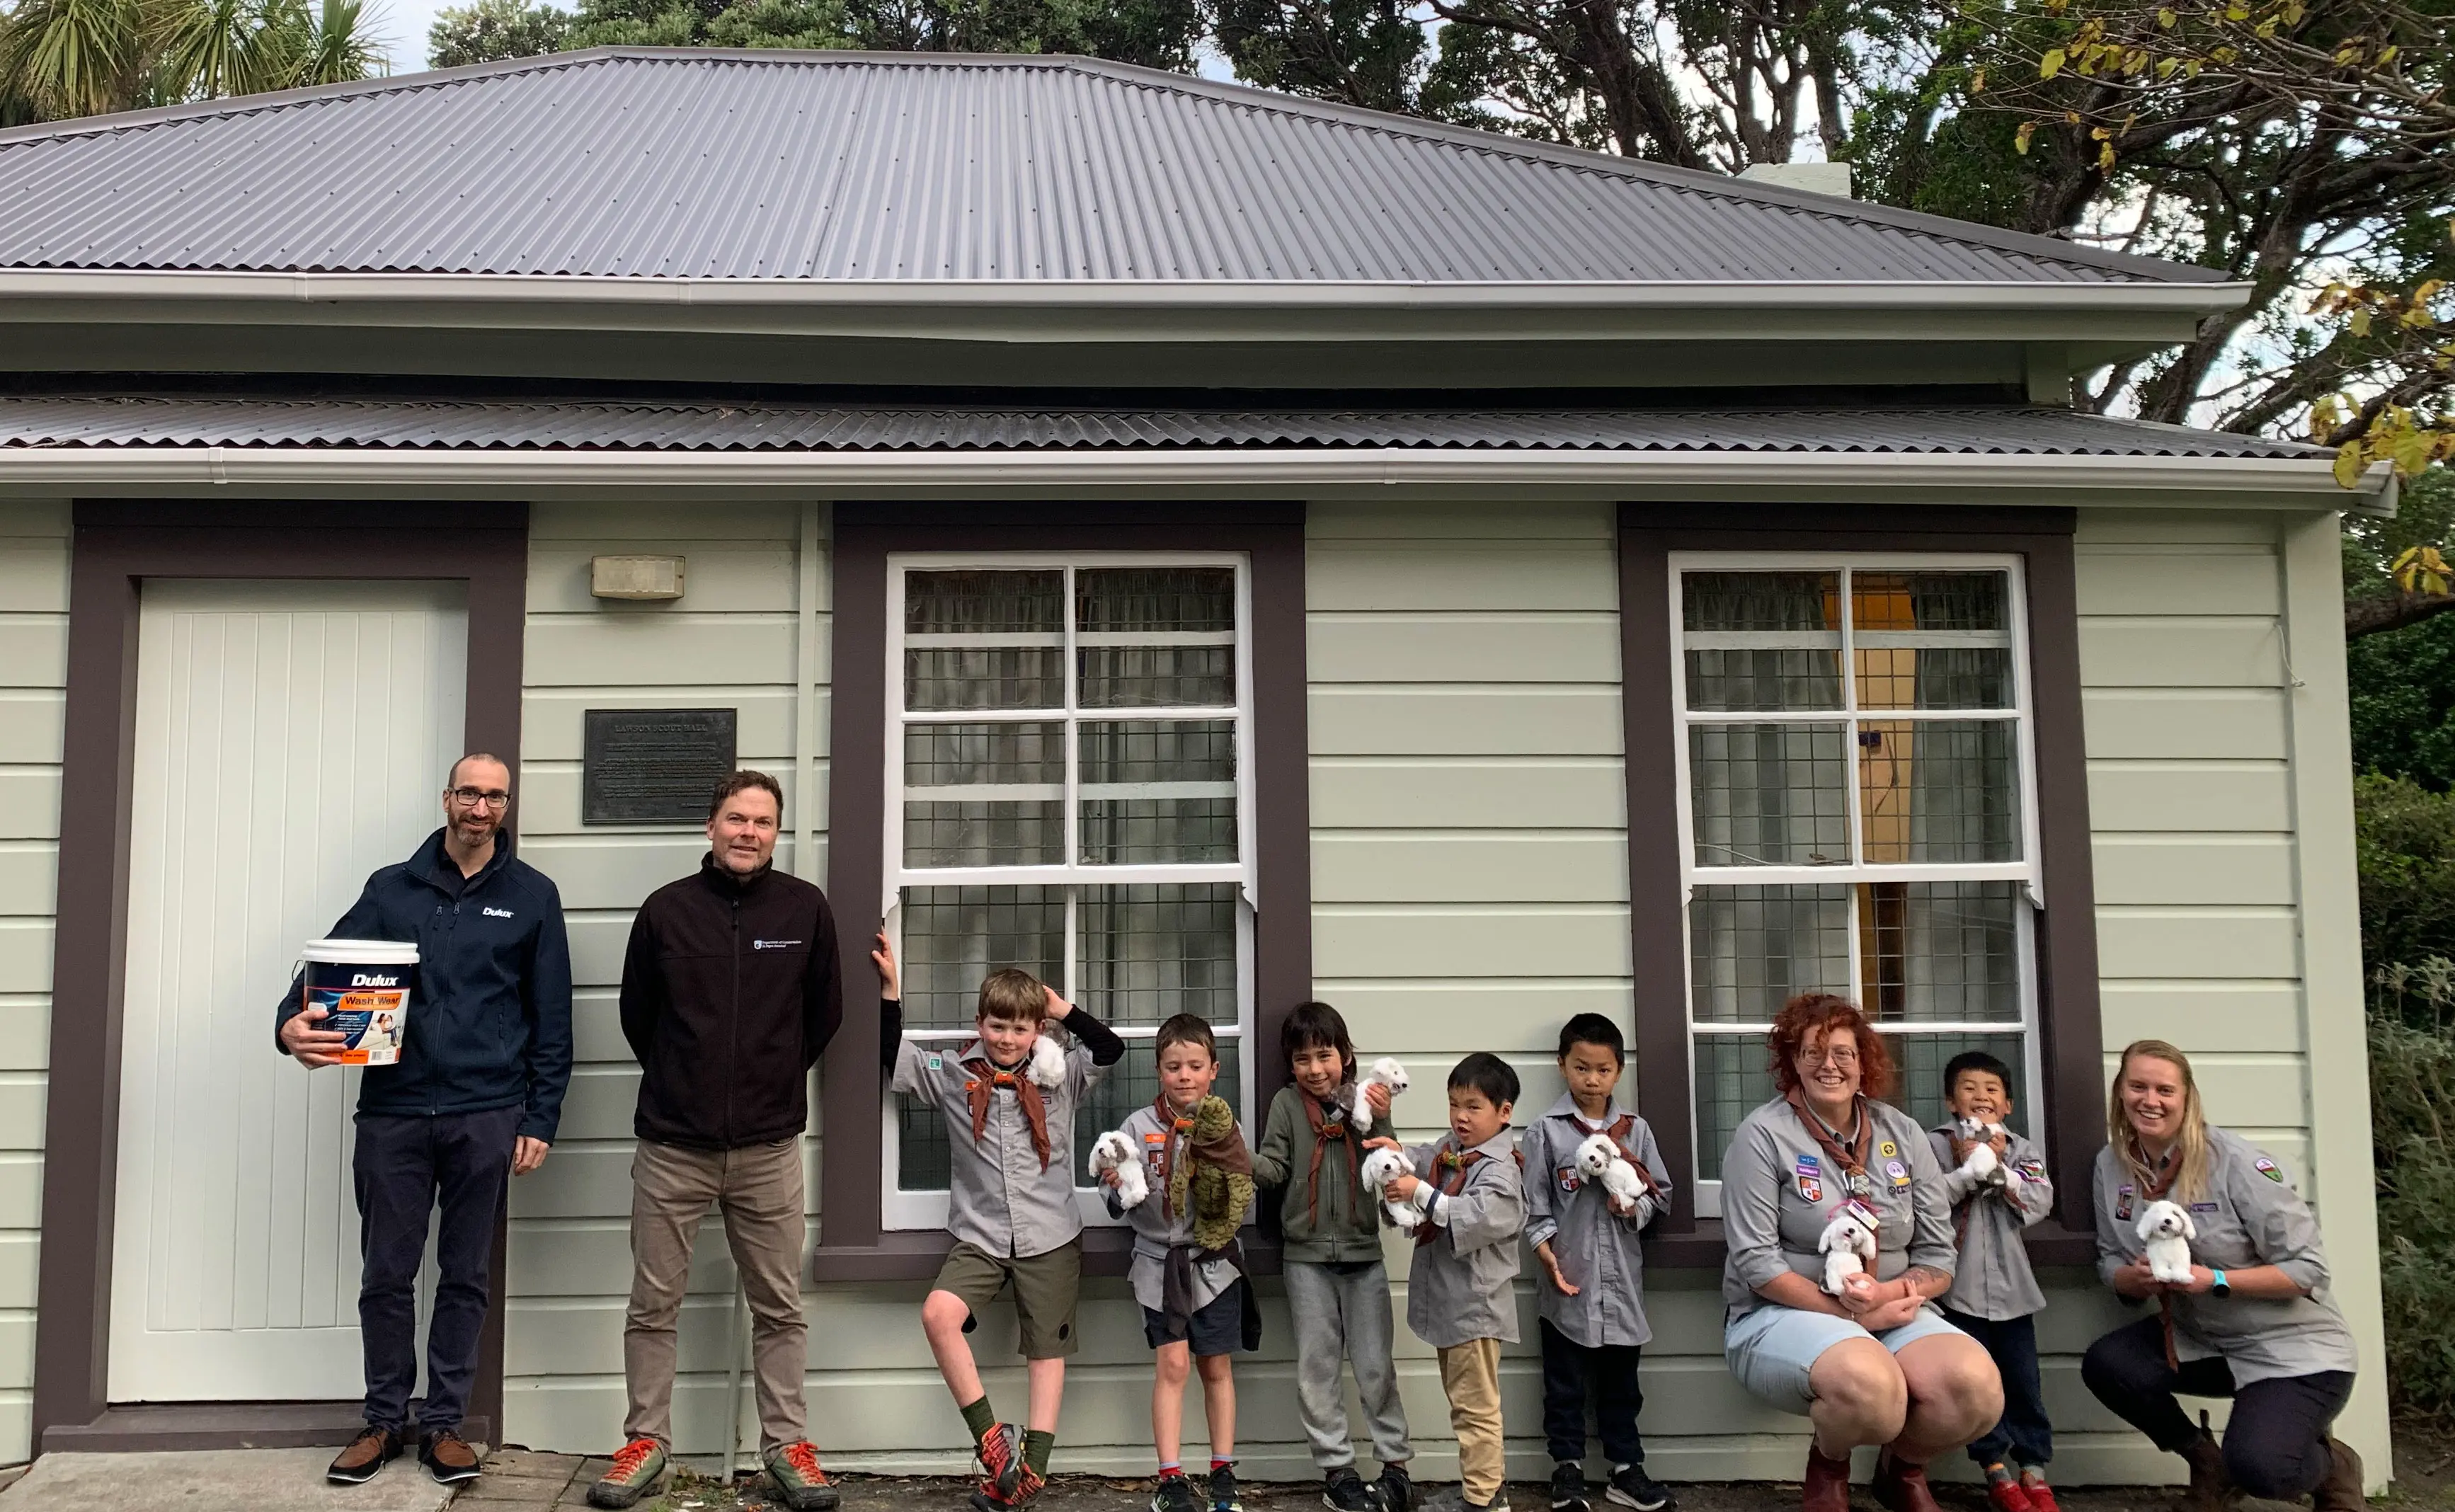 Children and adults stand in front of the newly painted scout hall